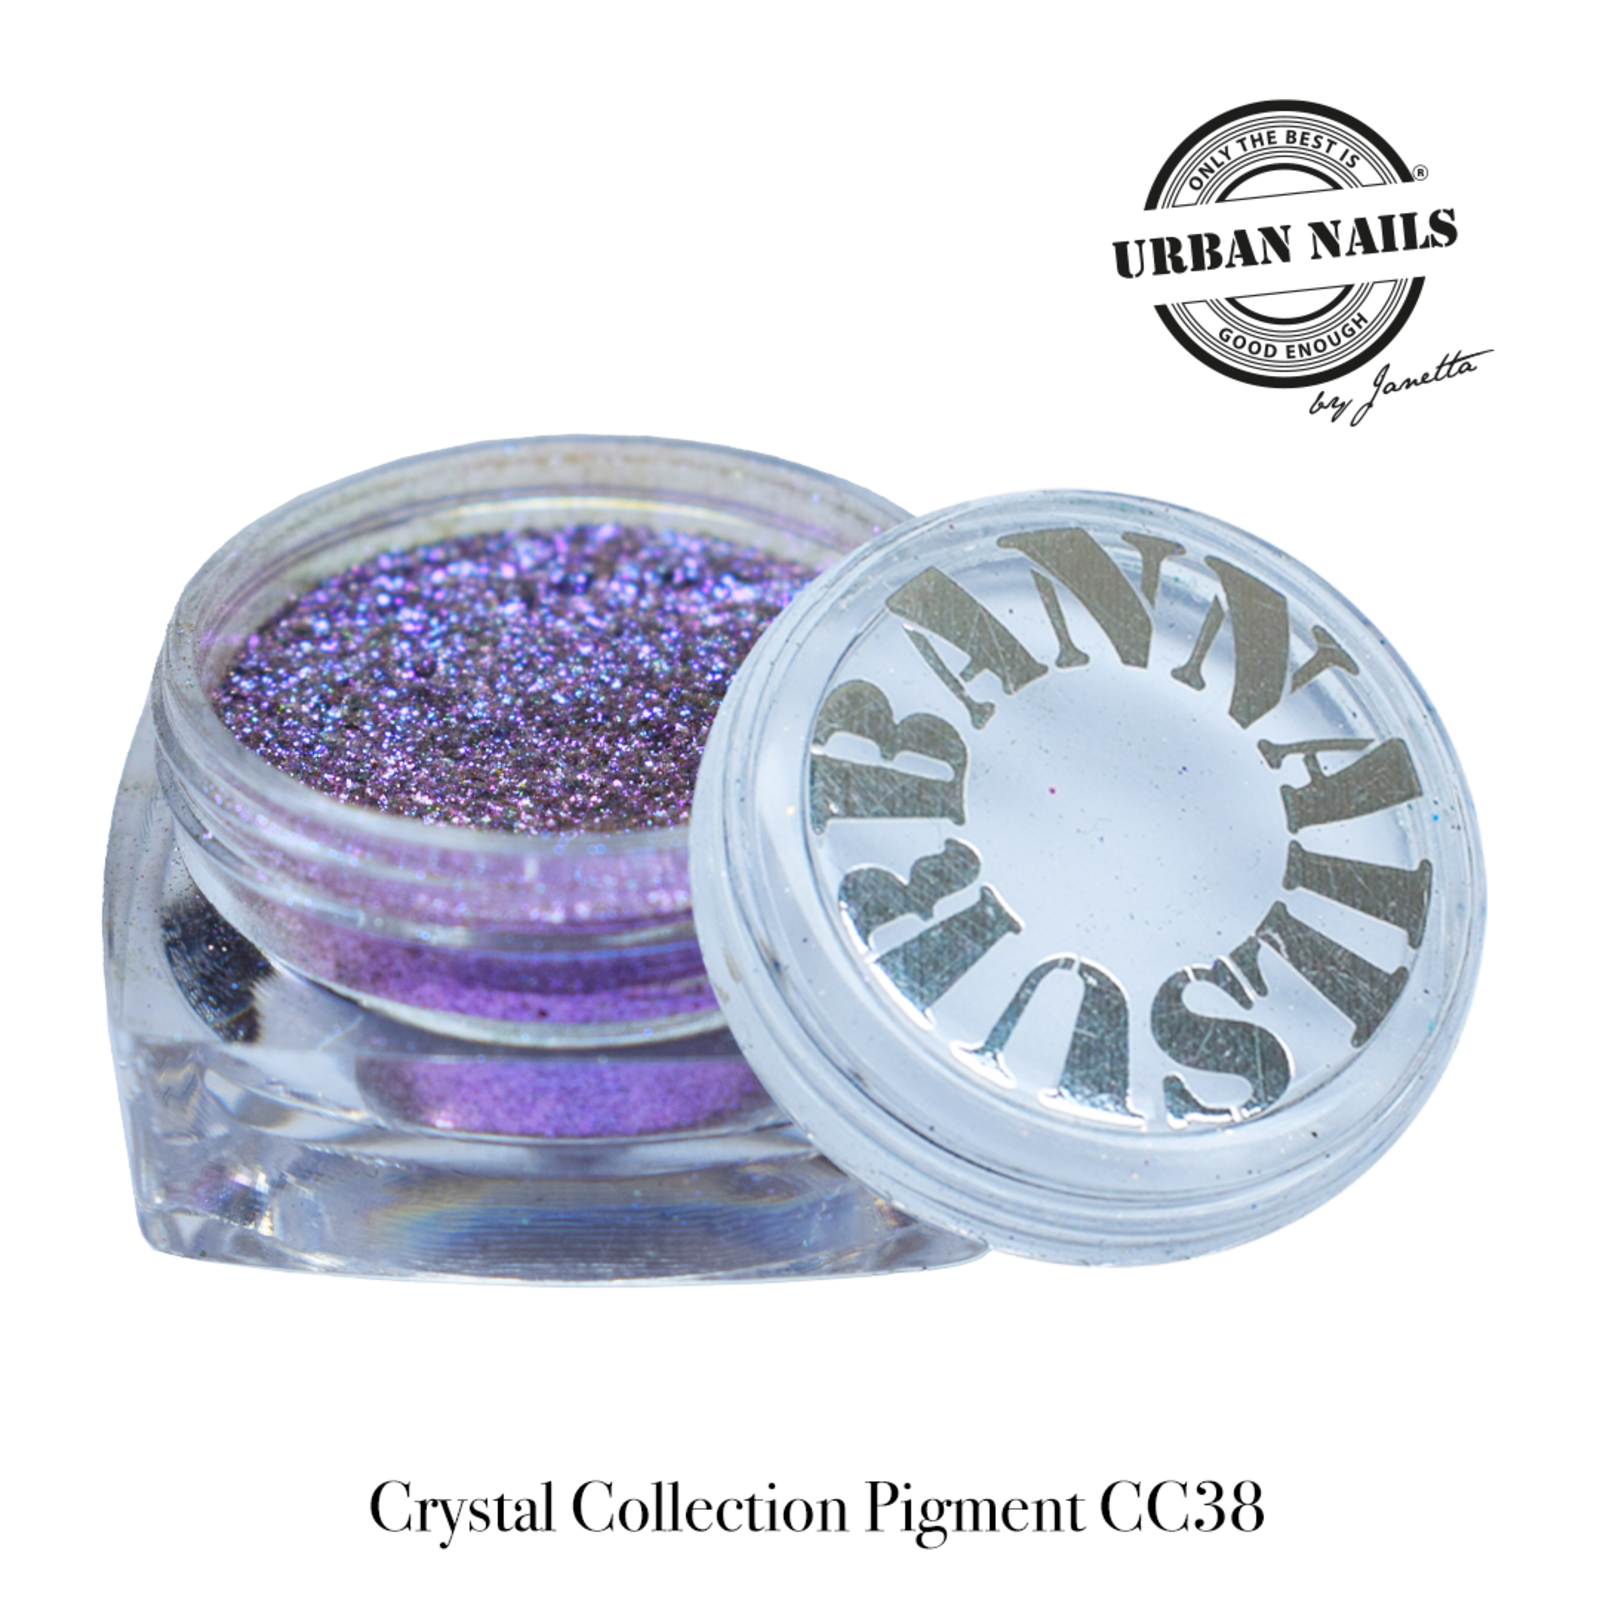 Urban nails Crystal Collection CC38